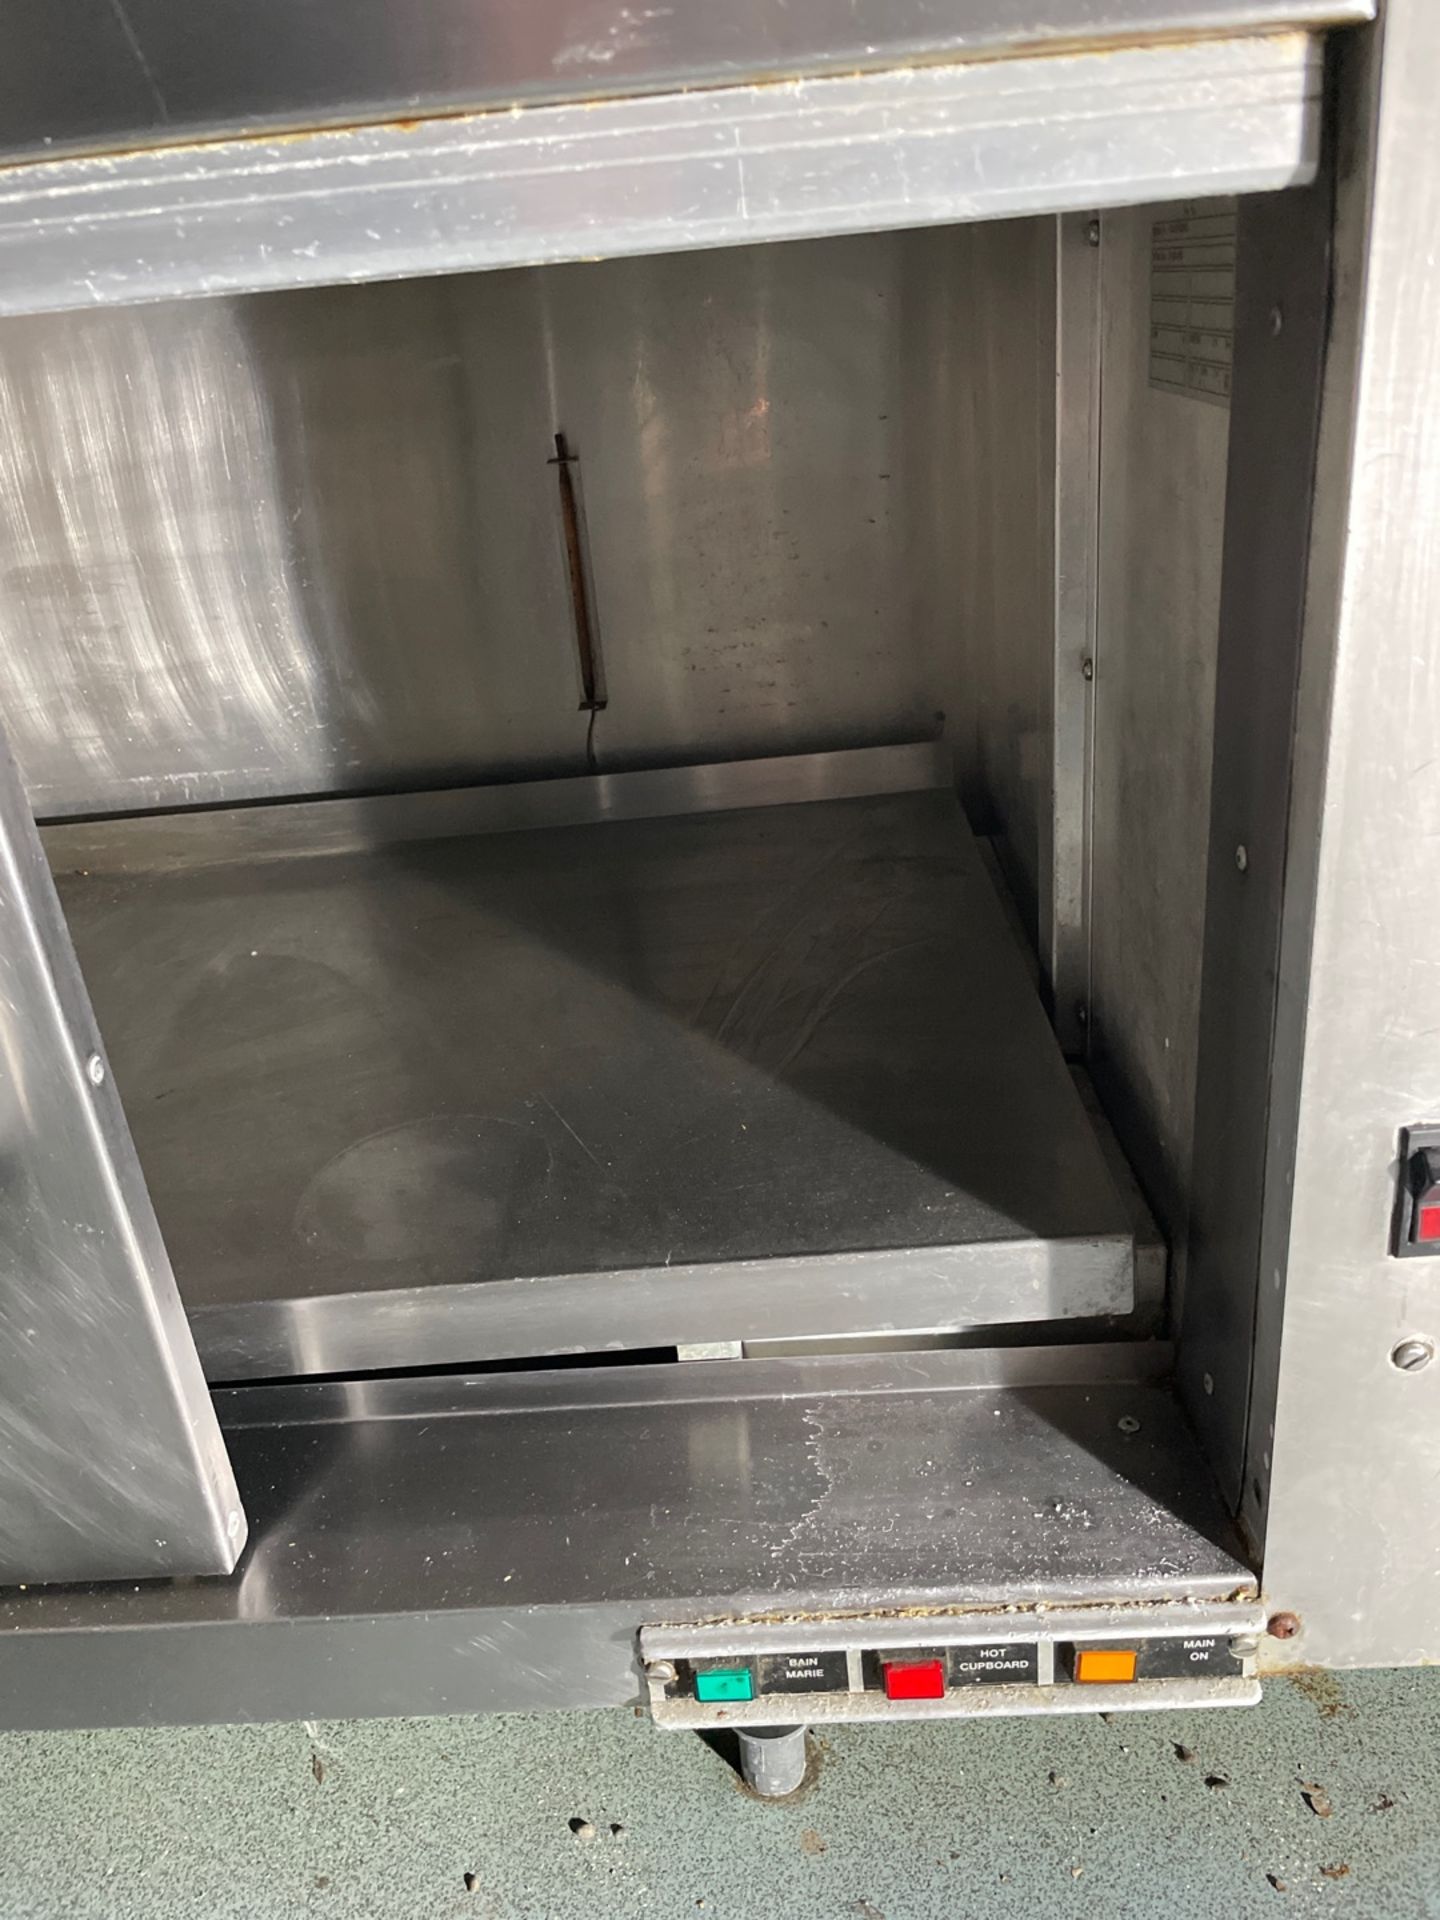 Stainless Steel Warming Cabinet - Image 2 of 2